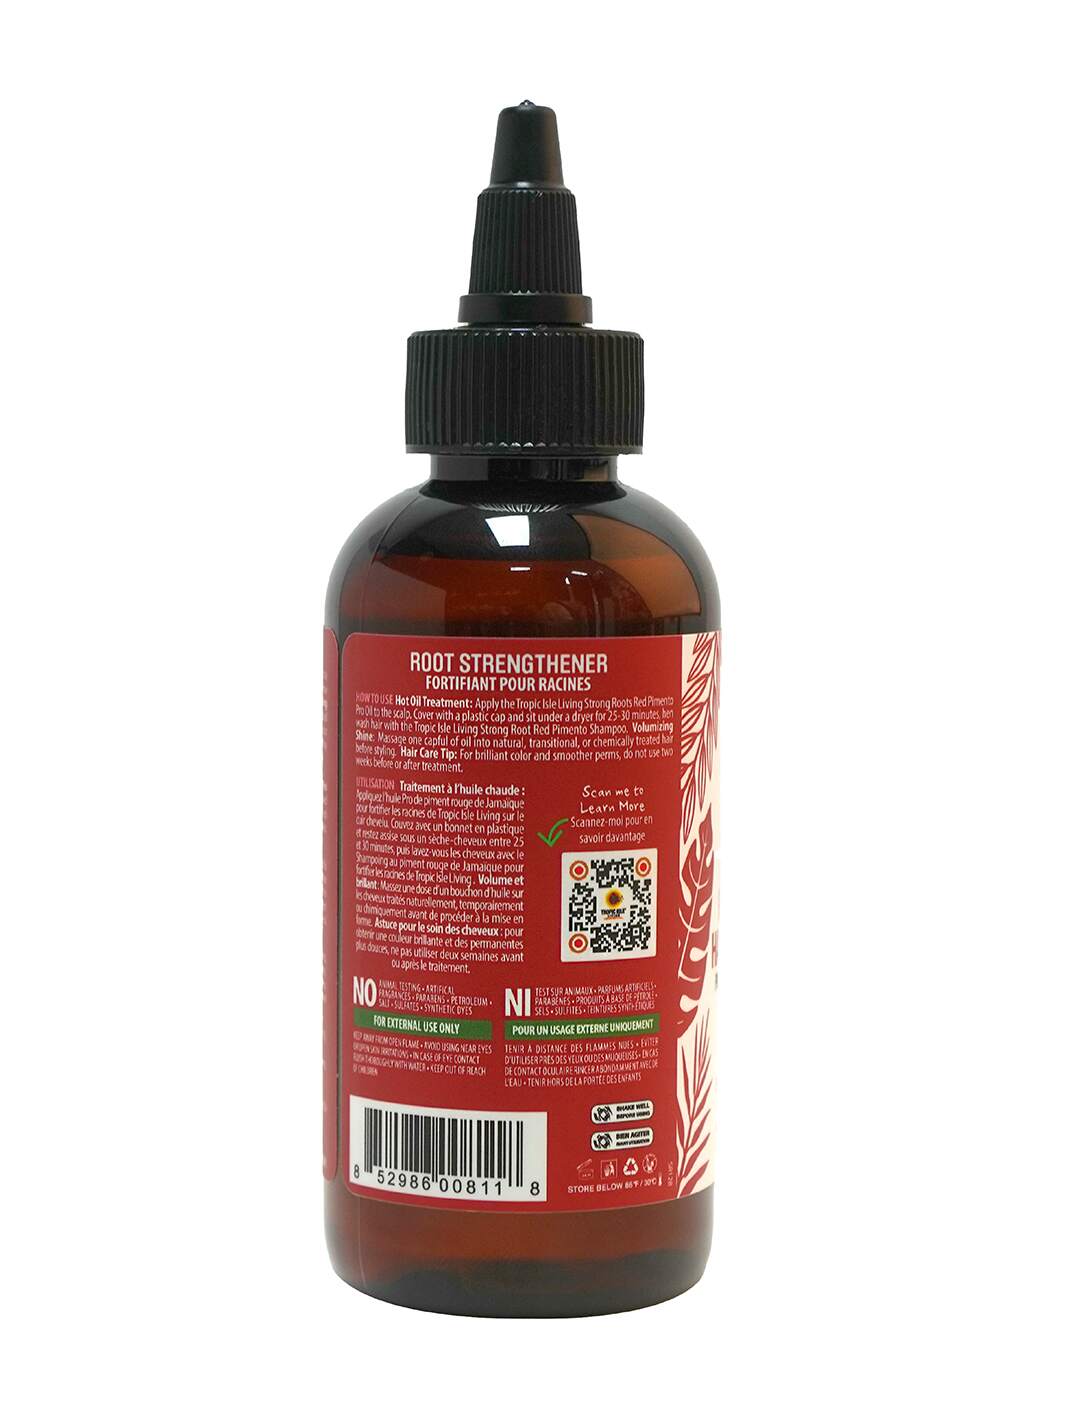 Strong Roots Red Pimento Hair Growth Oil 4oz